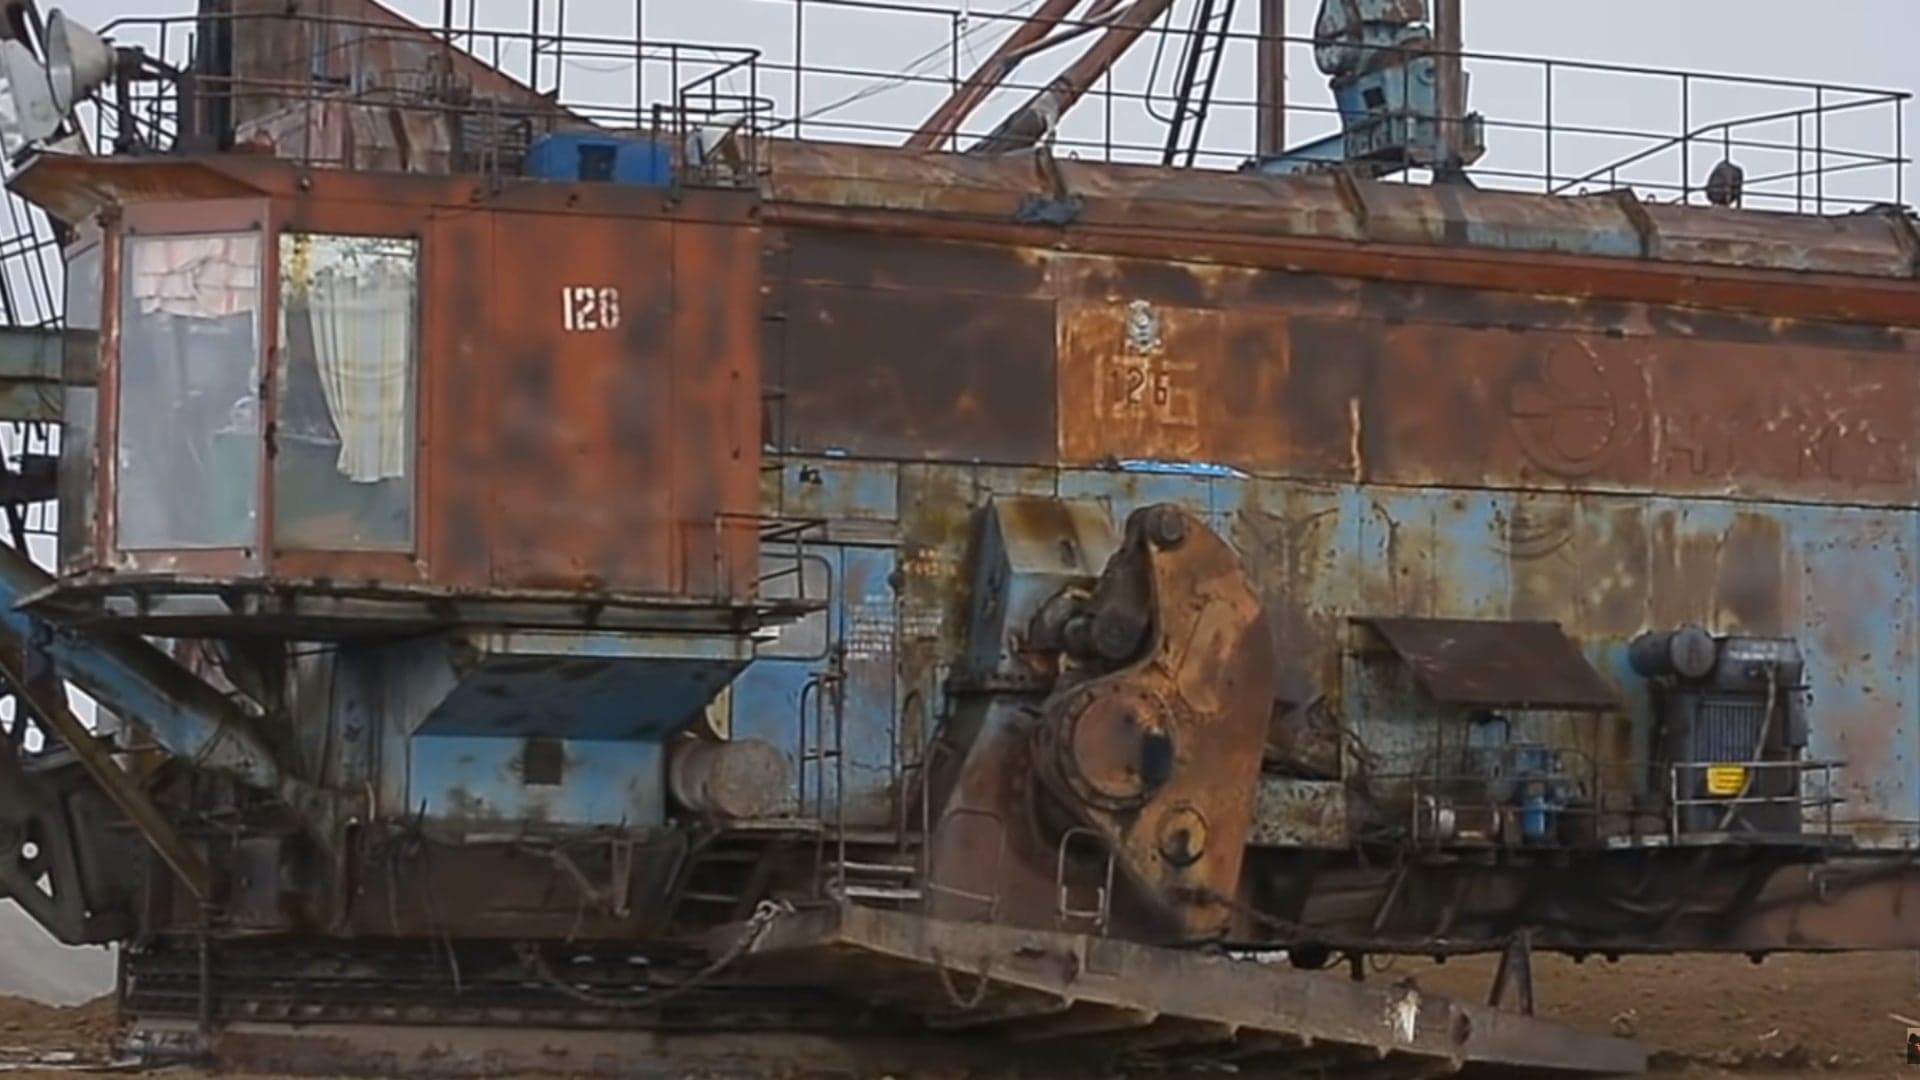 This Russian Walking Excavator Looks Like Something Straight Out of Star Wars